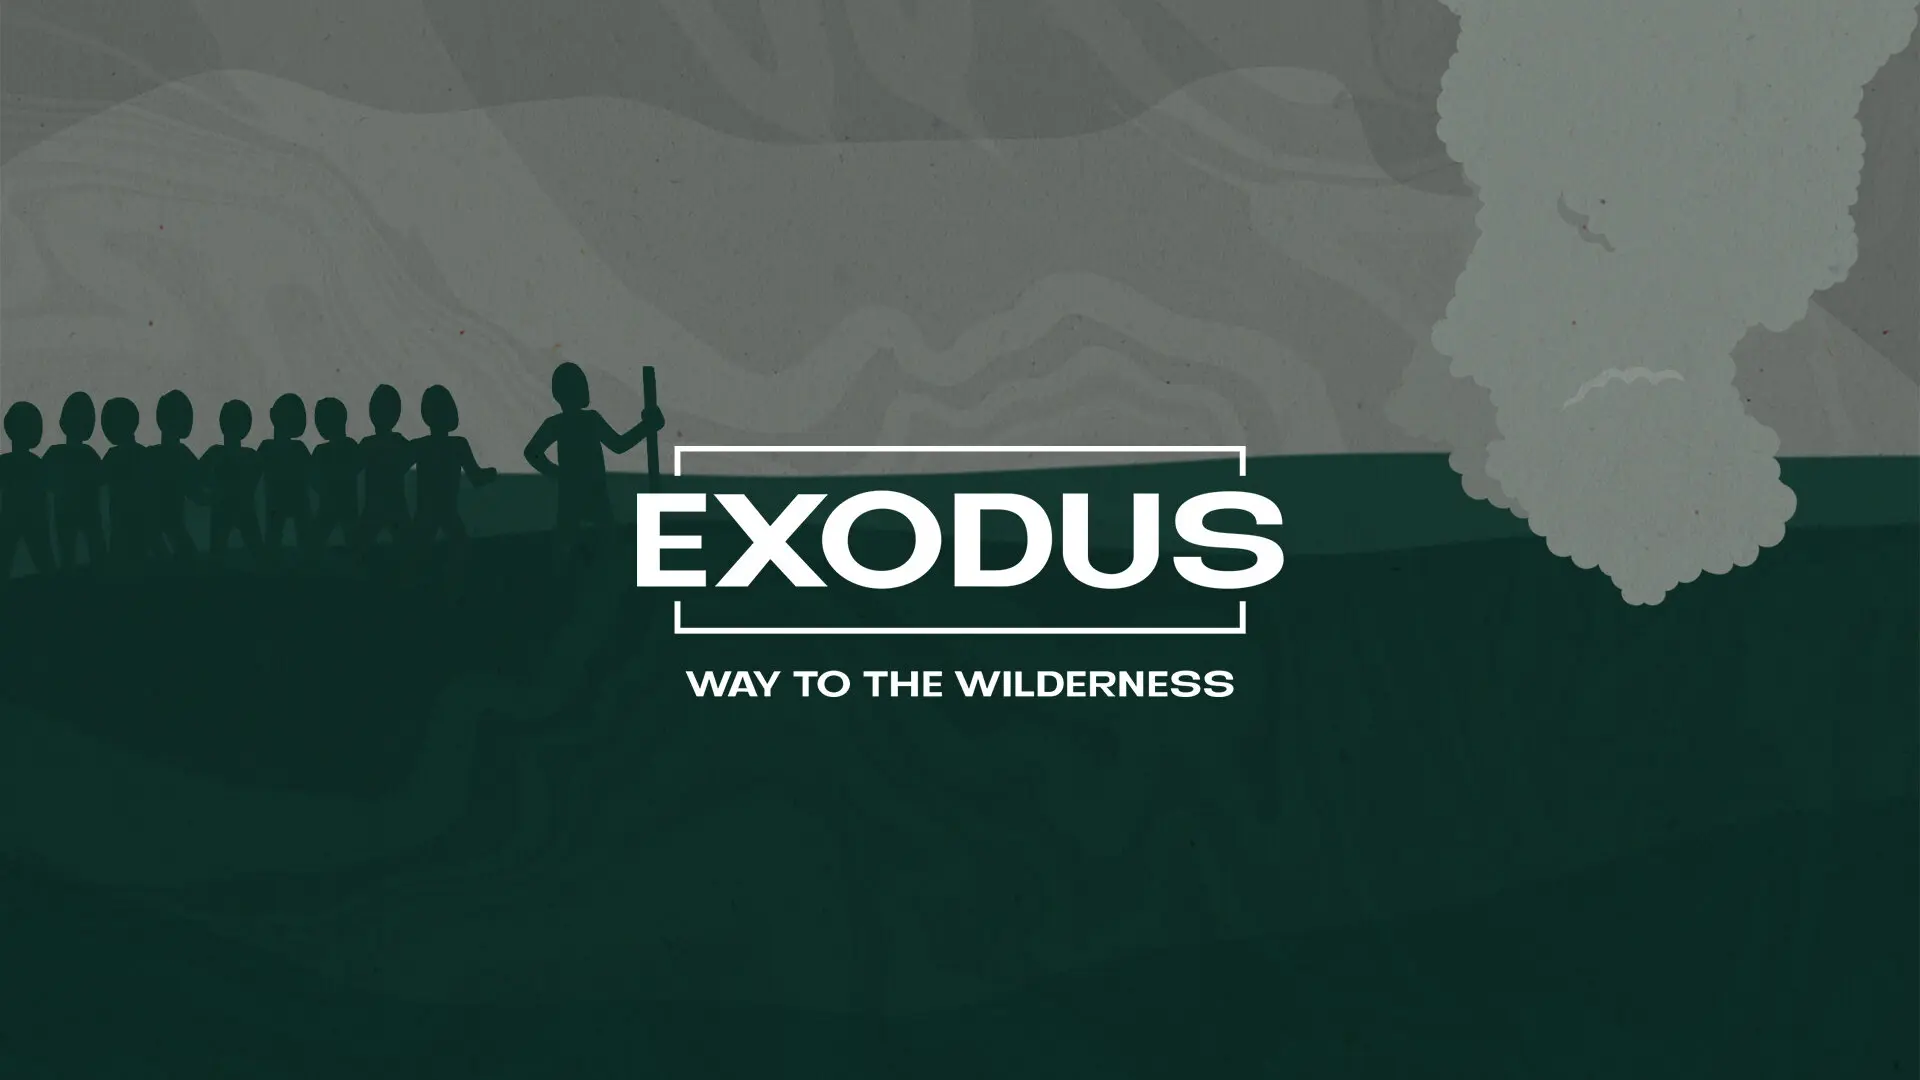 This Graphic, With Its Silhouette Of The Israelites And Moses Against The Wilderness Backdrop, Is An Evocative Representation For Sermons On The Book Of Exodus, Symbolizing The Journey Of Faith And Reliance On God'S Guidance.